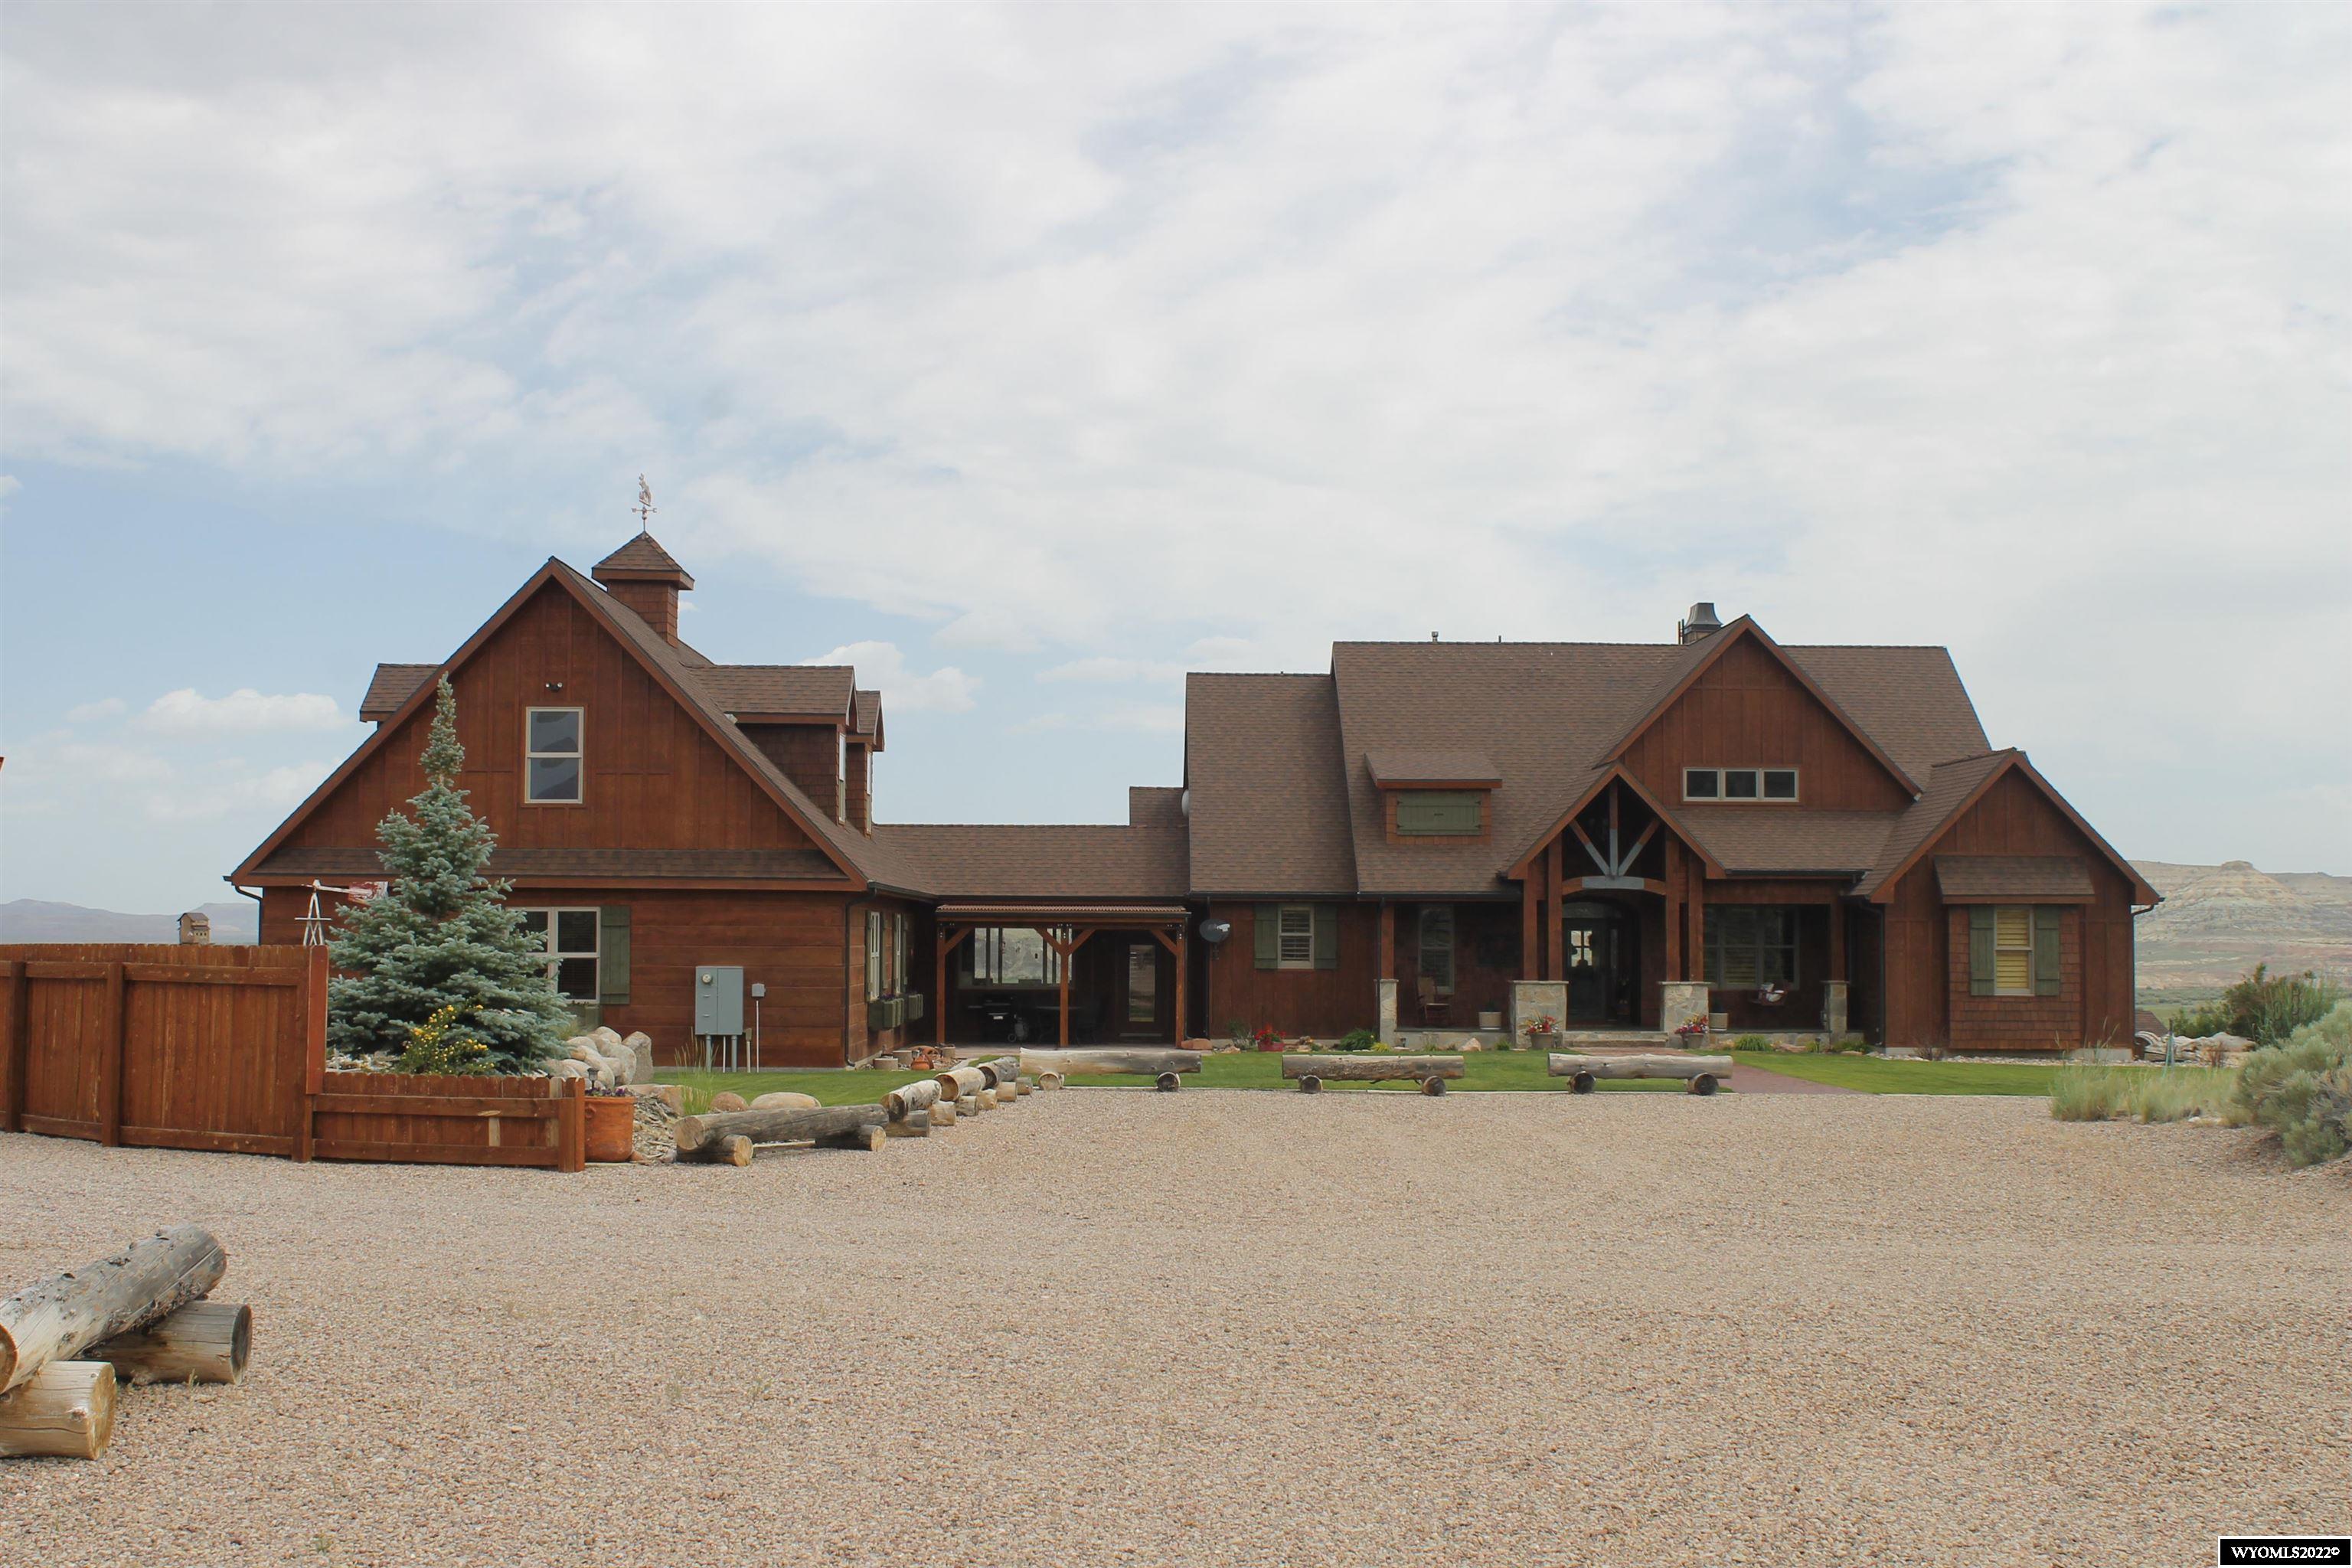 This custom home is located in an outdoor paradise area.  Within minutes you could be fly fishing the famous Green River or boating on Fontenelle Reservoir.  You could also enjoy hunting, riding horses or side by sides in the Wyoming Range. Rare find in this outdoor paradise. This 4800 square foot home has everything from 3 bedrooms and 4 full baths to a cedar sauna, workout room, and a separate bar area along with a formal dining room. The property could easily be split into upper and lower living areas for care taking or an upscale hunting lodge. The home offers a separate 3 car garage with an unfinished upstairs 1200 square foot living area.   There is also a separate shop and a craft shed.  The home has several separate rooms that could be used for offices, arts and crafts, hobbies or more rooms.  This is the perfect home to entertain fishing and hunting buddies or raise a family with country living.  The home has central air and a rock wood burning fireplace stretching to the ceiling.  You can go to either Jackson Hole Wyoming or Park City Utah ski slopes within a few hours or stay home and enjoy some of the best snowmobiling in the country.  Come see why this area is well known for its great fishing, big game hunting and recreation opportunities.   Green River Fly fishing boat launches within minutes Fontenelle Réservoir minutes down the road Wyoming Range for hunting Labarge Creek Elk Hunting Deer Hunting Moose Antelope Jackson Hole,Wy  approx 2 hours Park City,  Utah approx 2 Hours  Snowmobiling New Fork River Unlimited Blm and State Trust Land in the area Private airport 20 miles away.